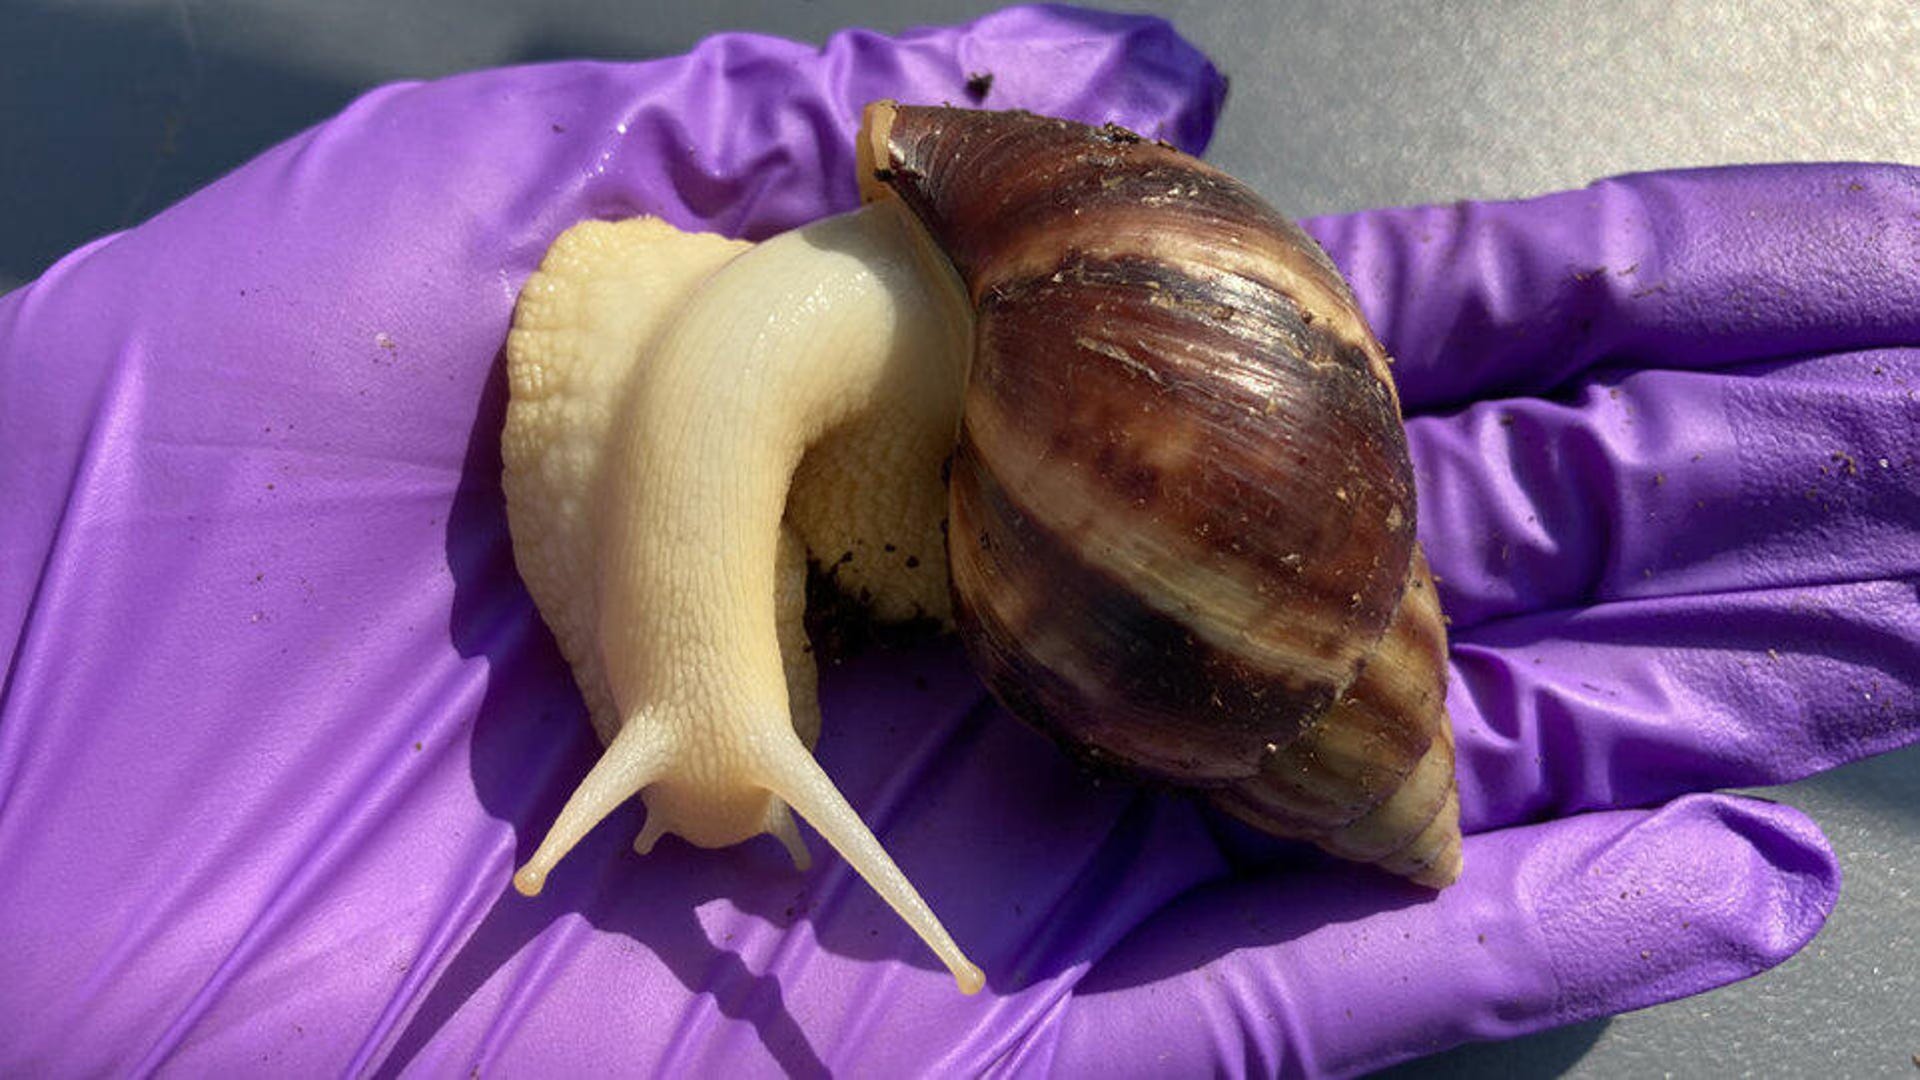 Large snail with a conical shell sits on a gloved hand.